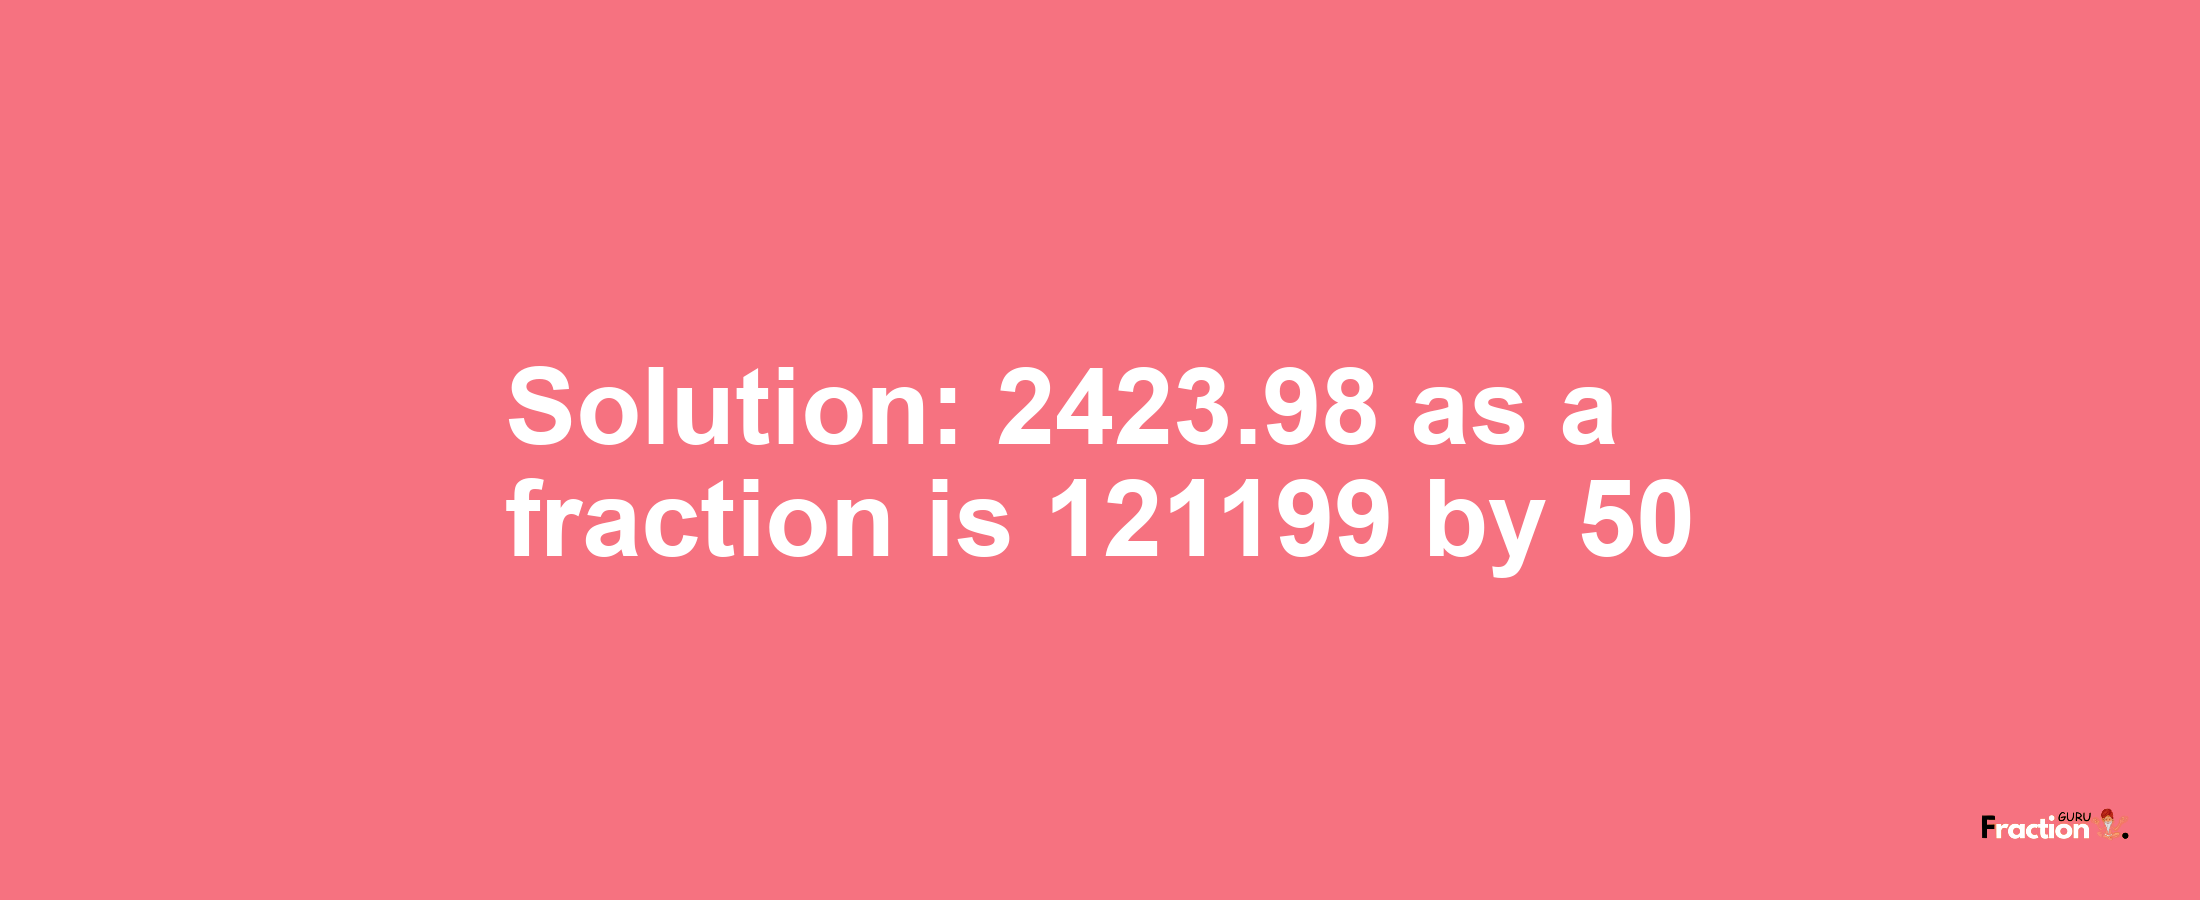 Solution:2423.98 as a fraction is 121199/50